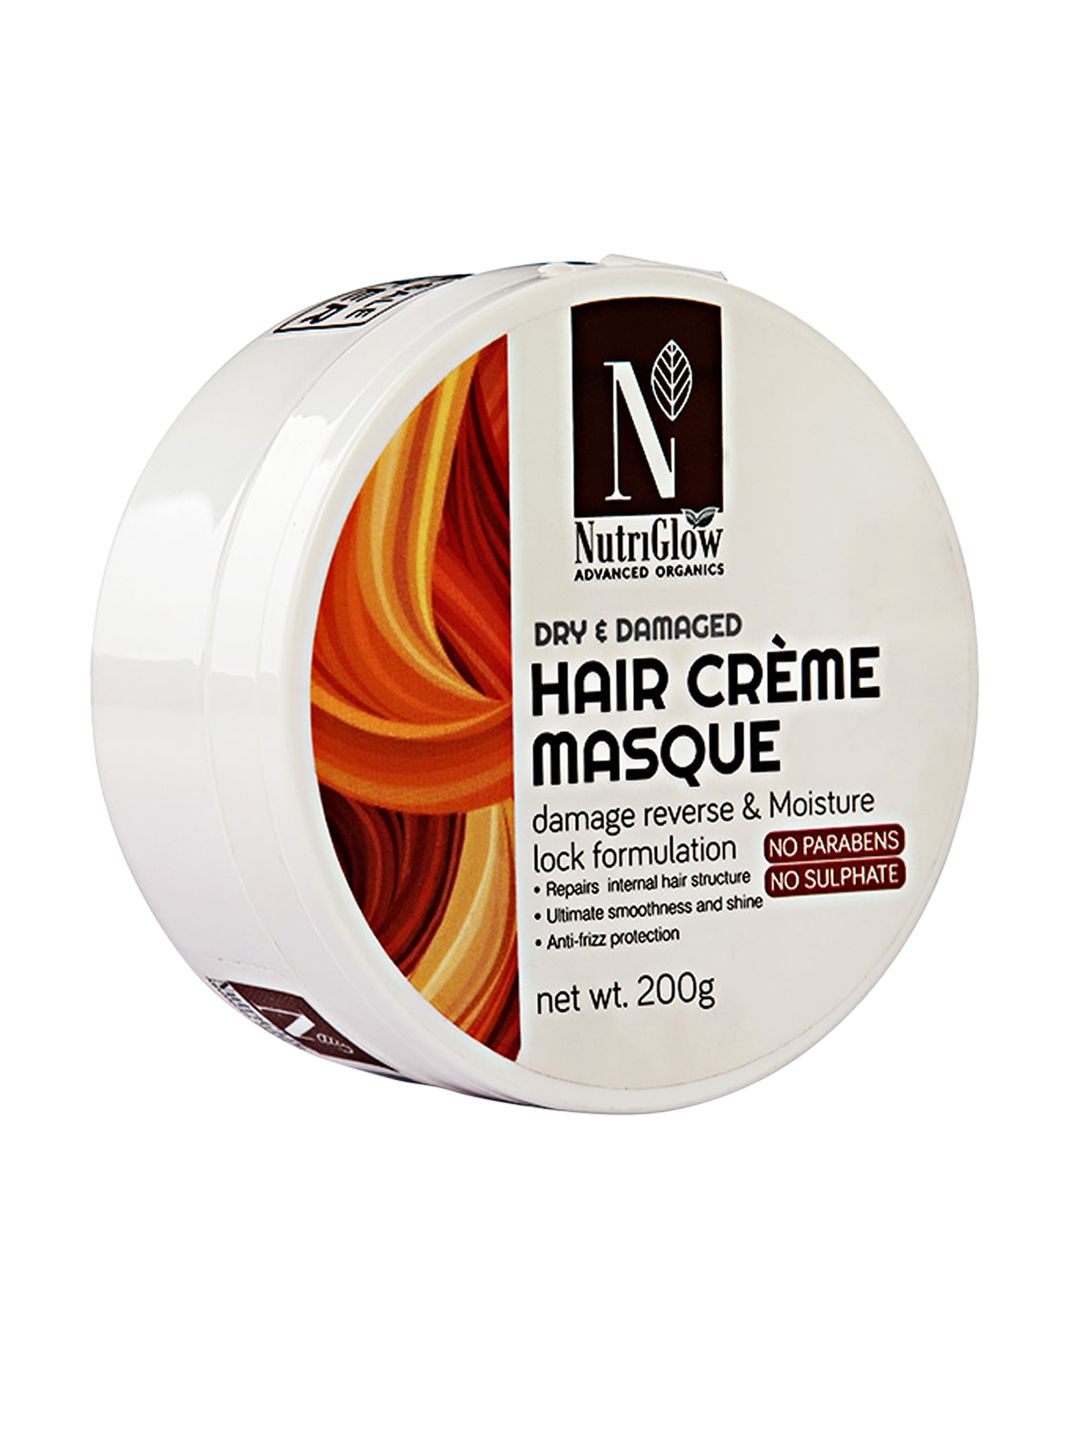 Nutriglow Advanced Organics Hair Creme Masque for Dry & Damaged Hair - 200g Price in India